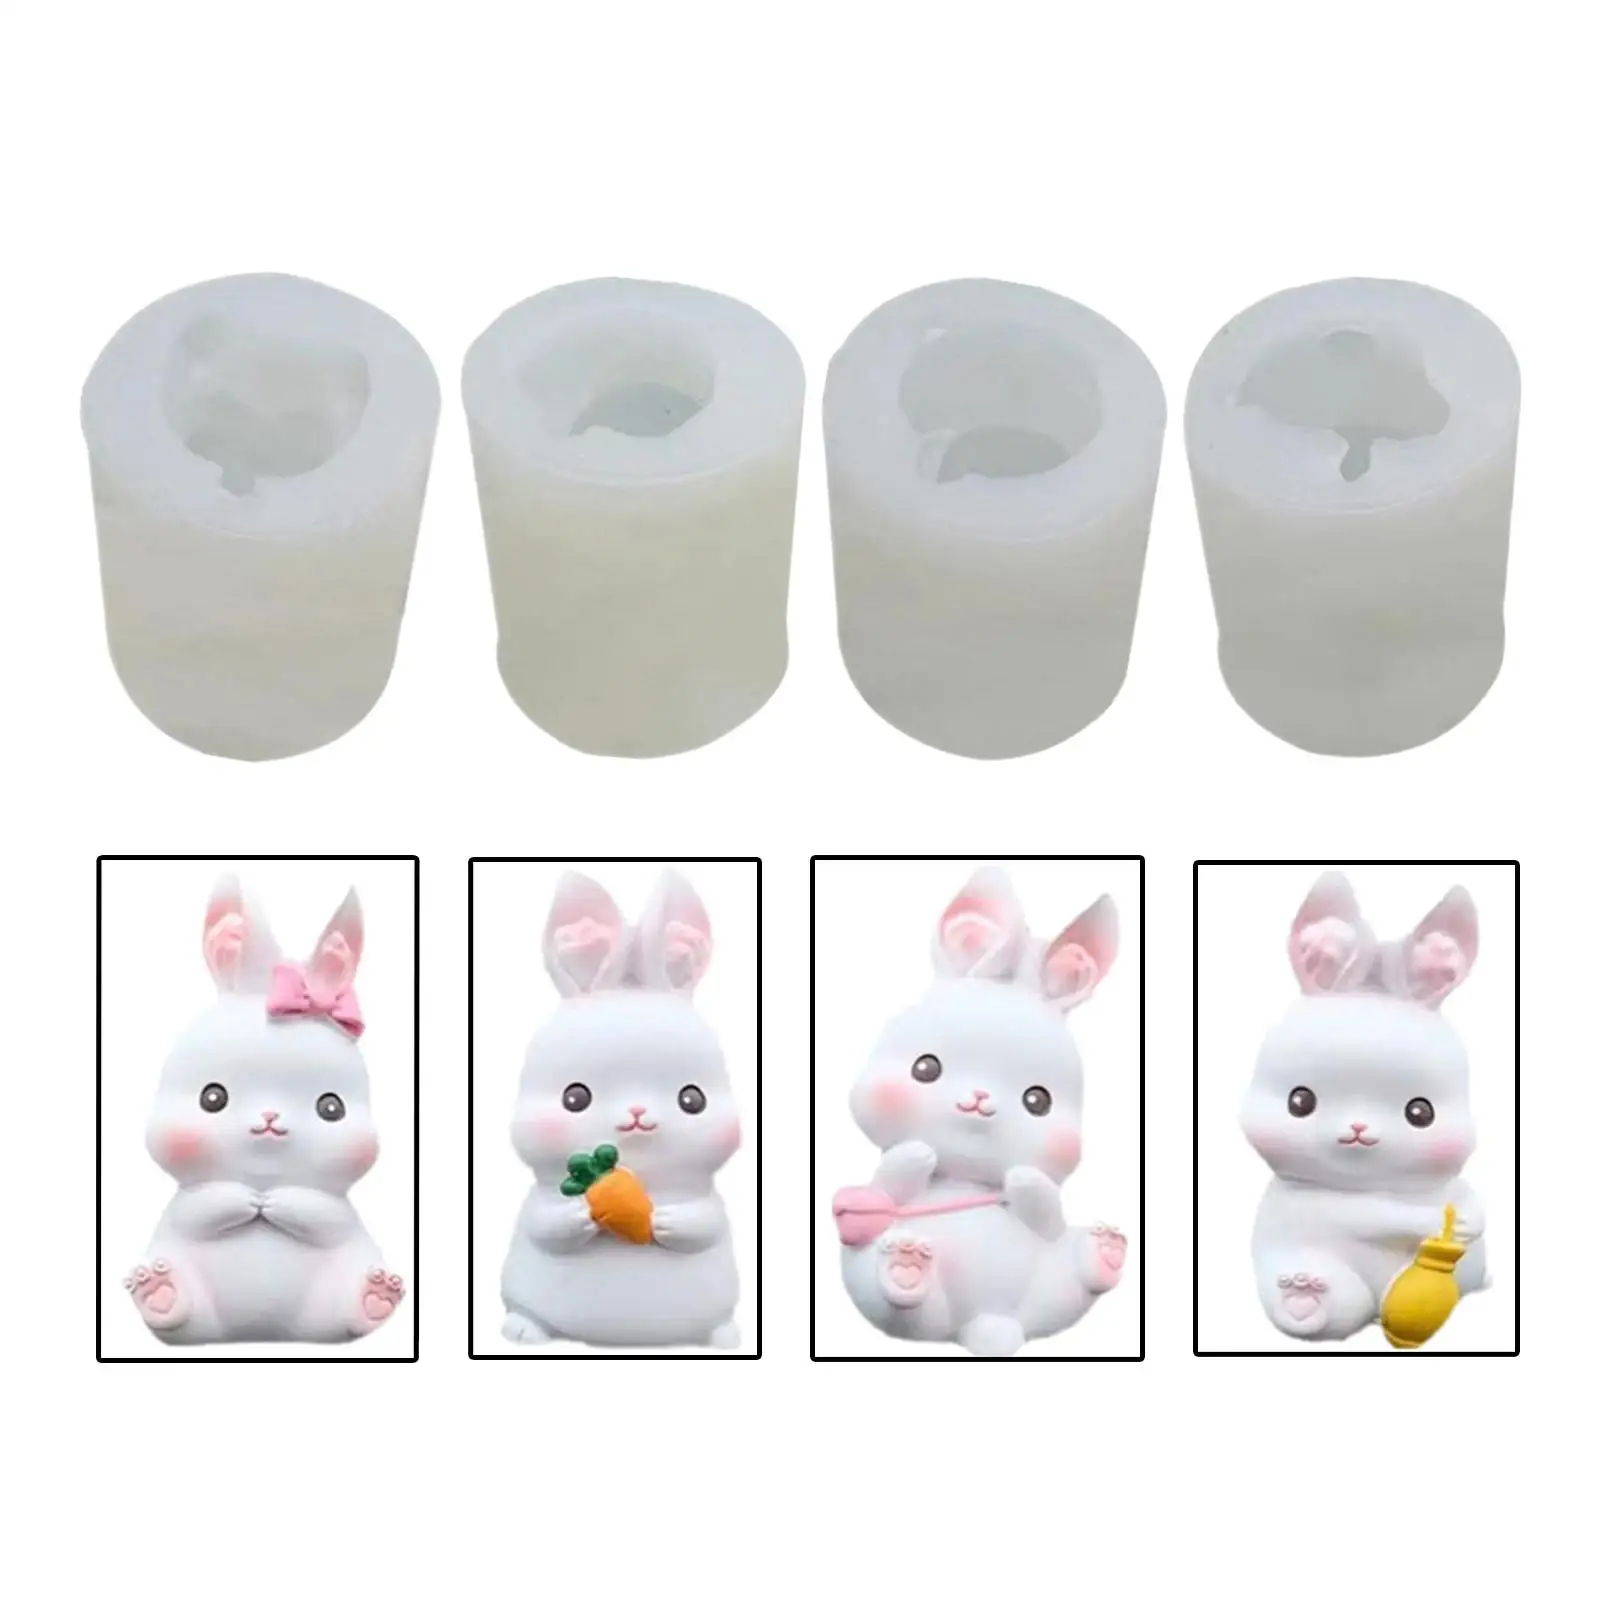 4 Pieces Bunny Chocolate Moulds Bunny Cake Moulds Cake Moulds Bunny Baking Mould for Holiday Fondant Dessert Jelly Cake